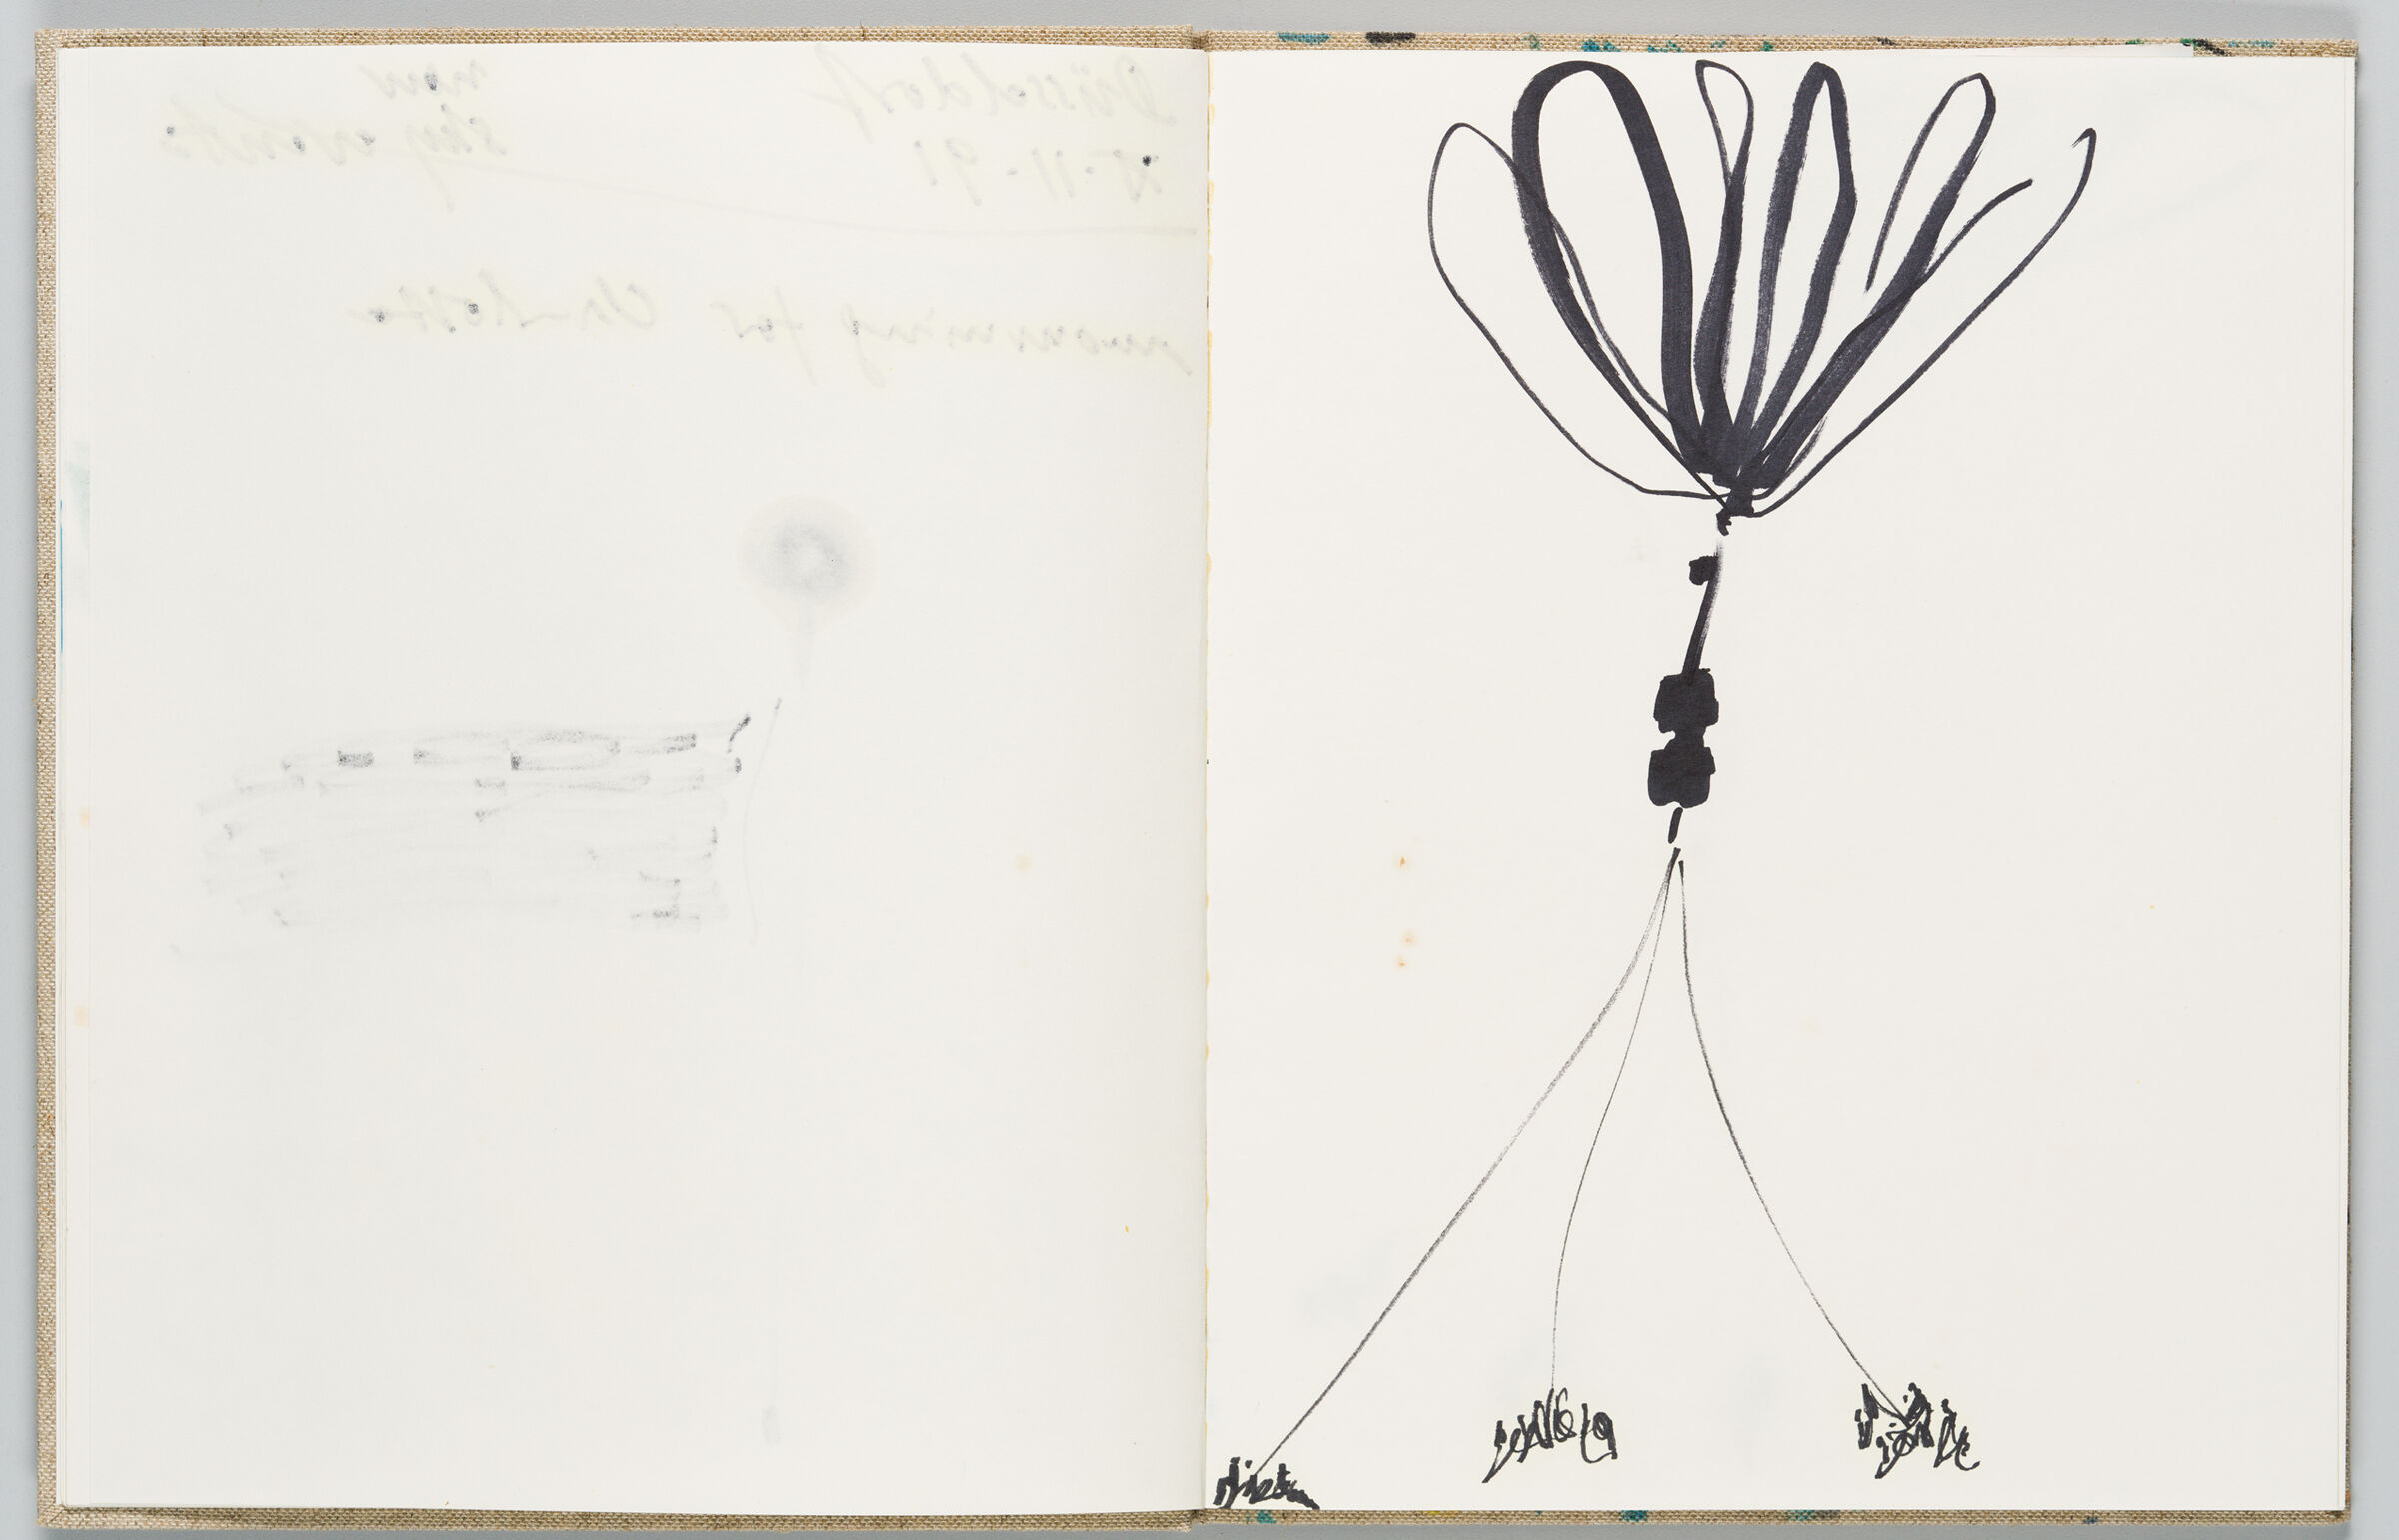 Untitled (Bleed-Through Of Previous Page, Left Page); Untitled (Sky Event For Charlotte, Right Page)